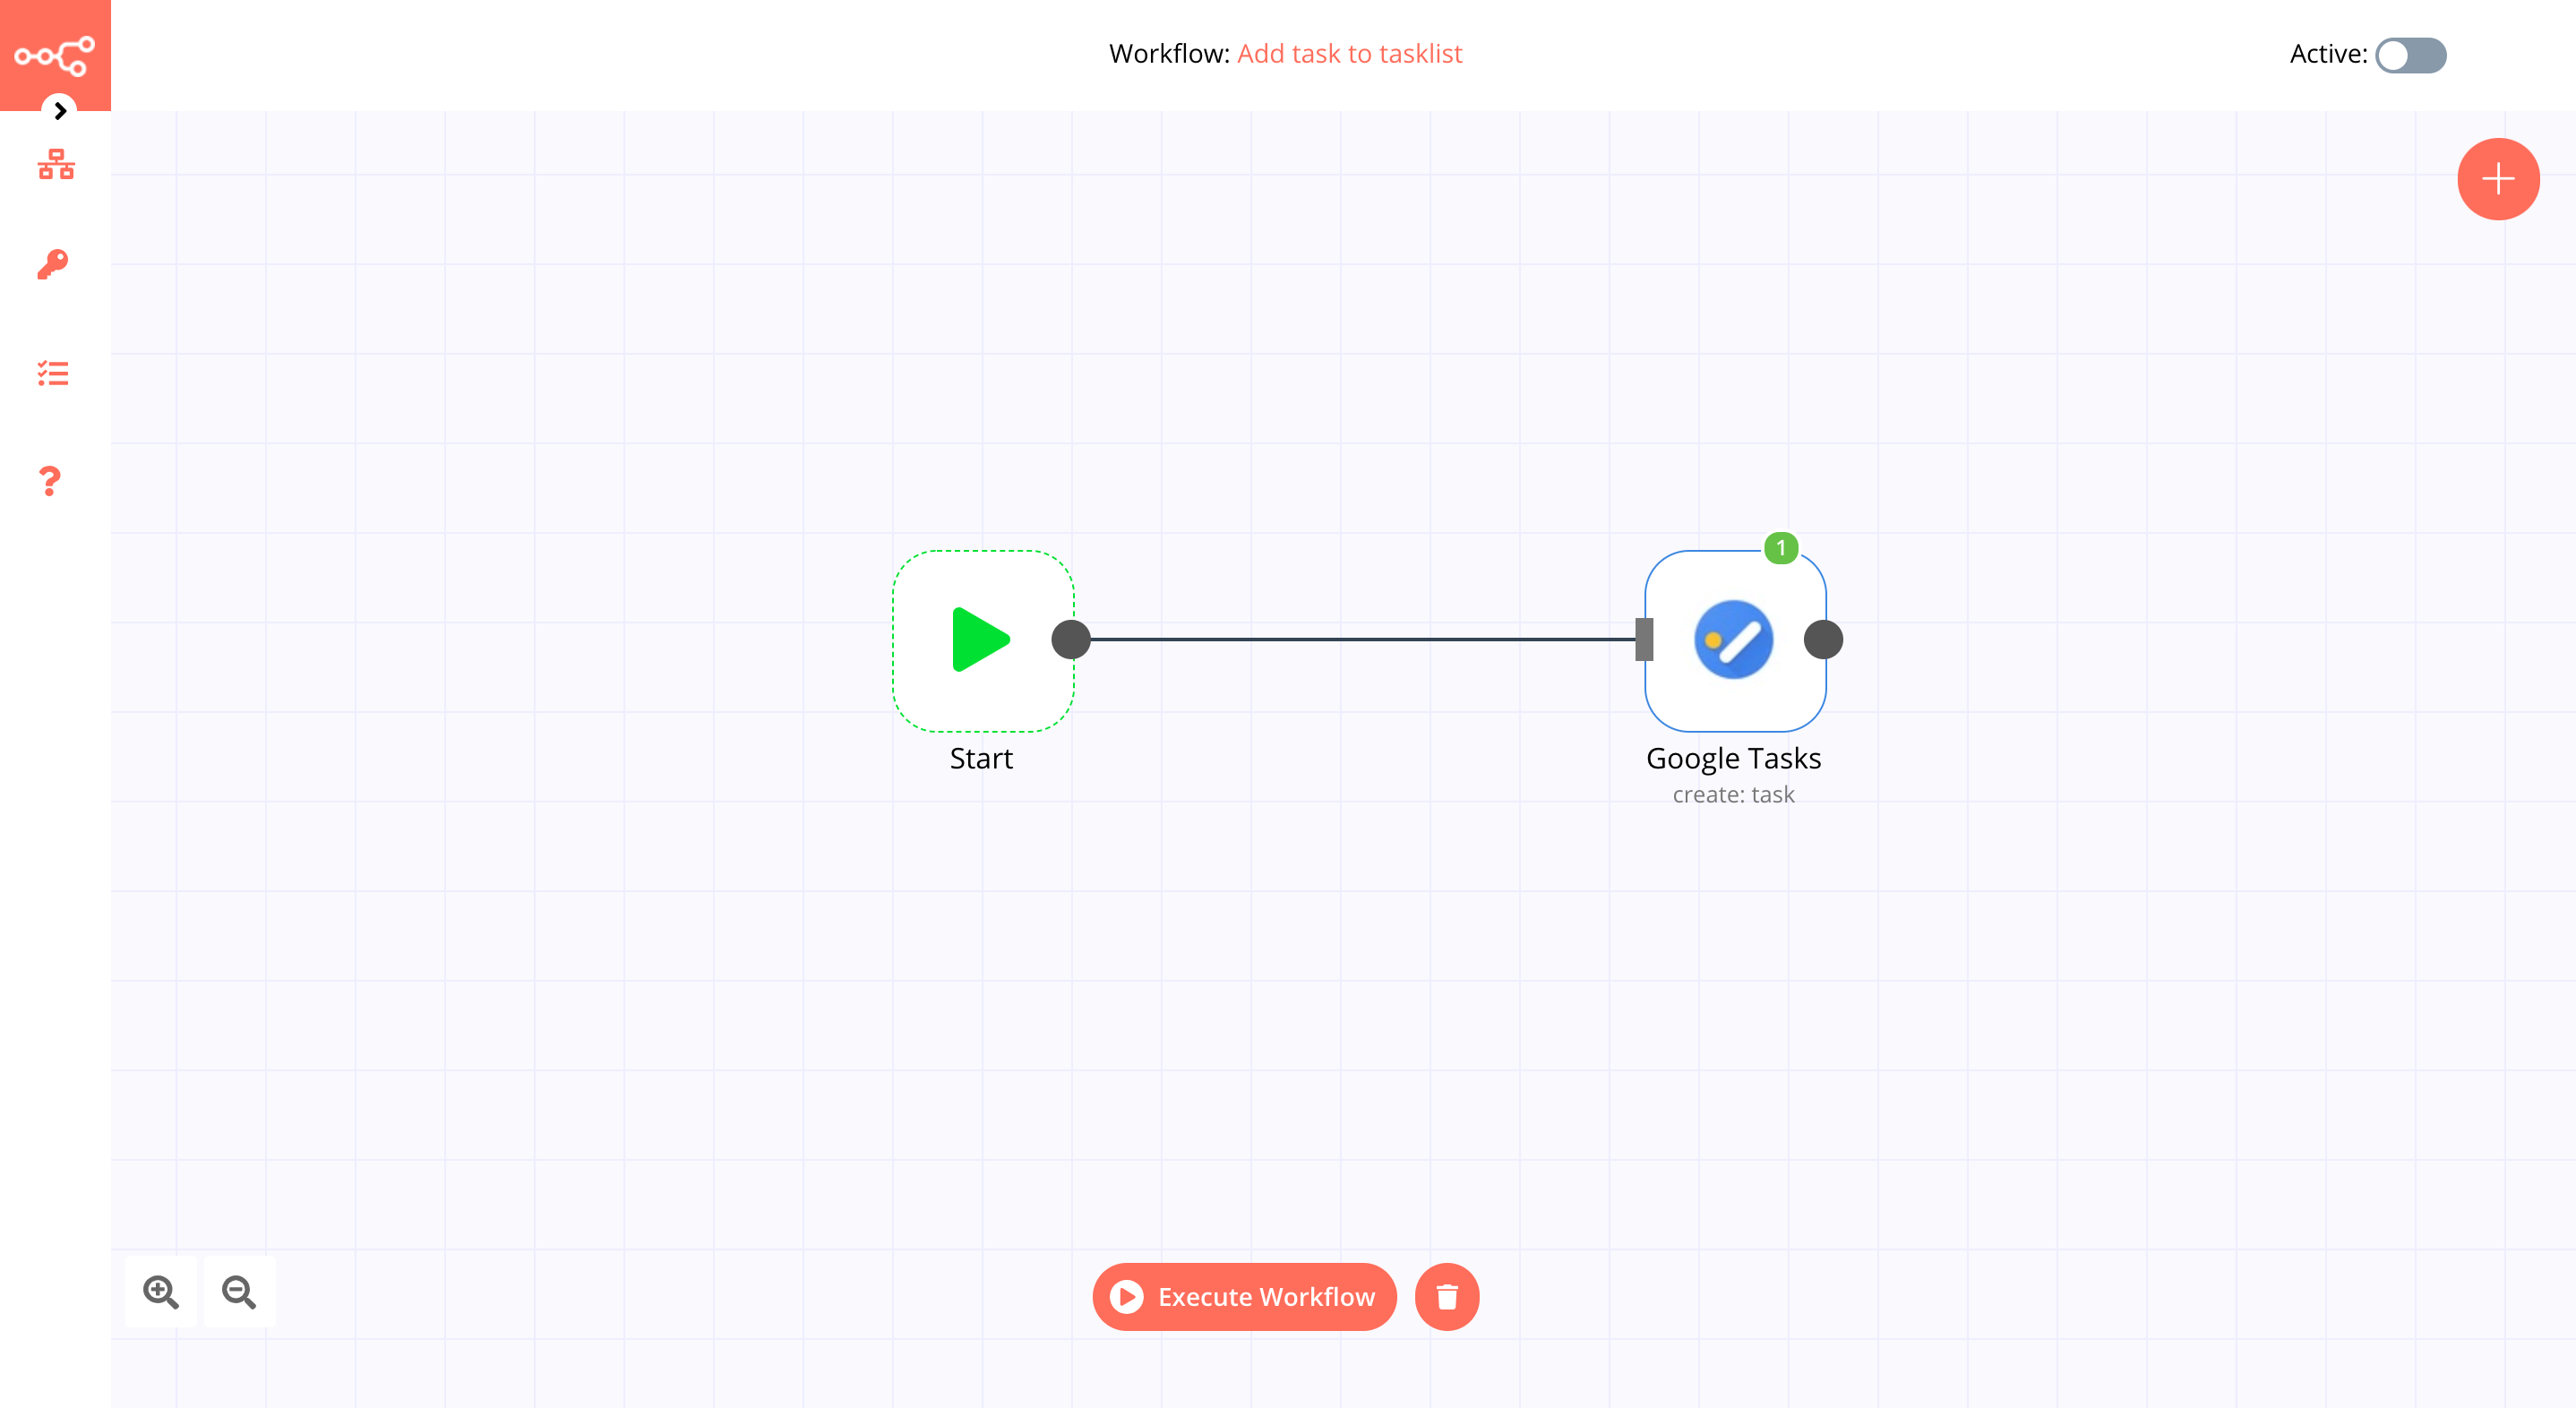 A workflow with the Google Tasks node